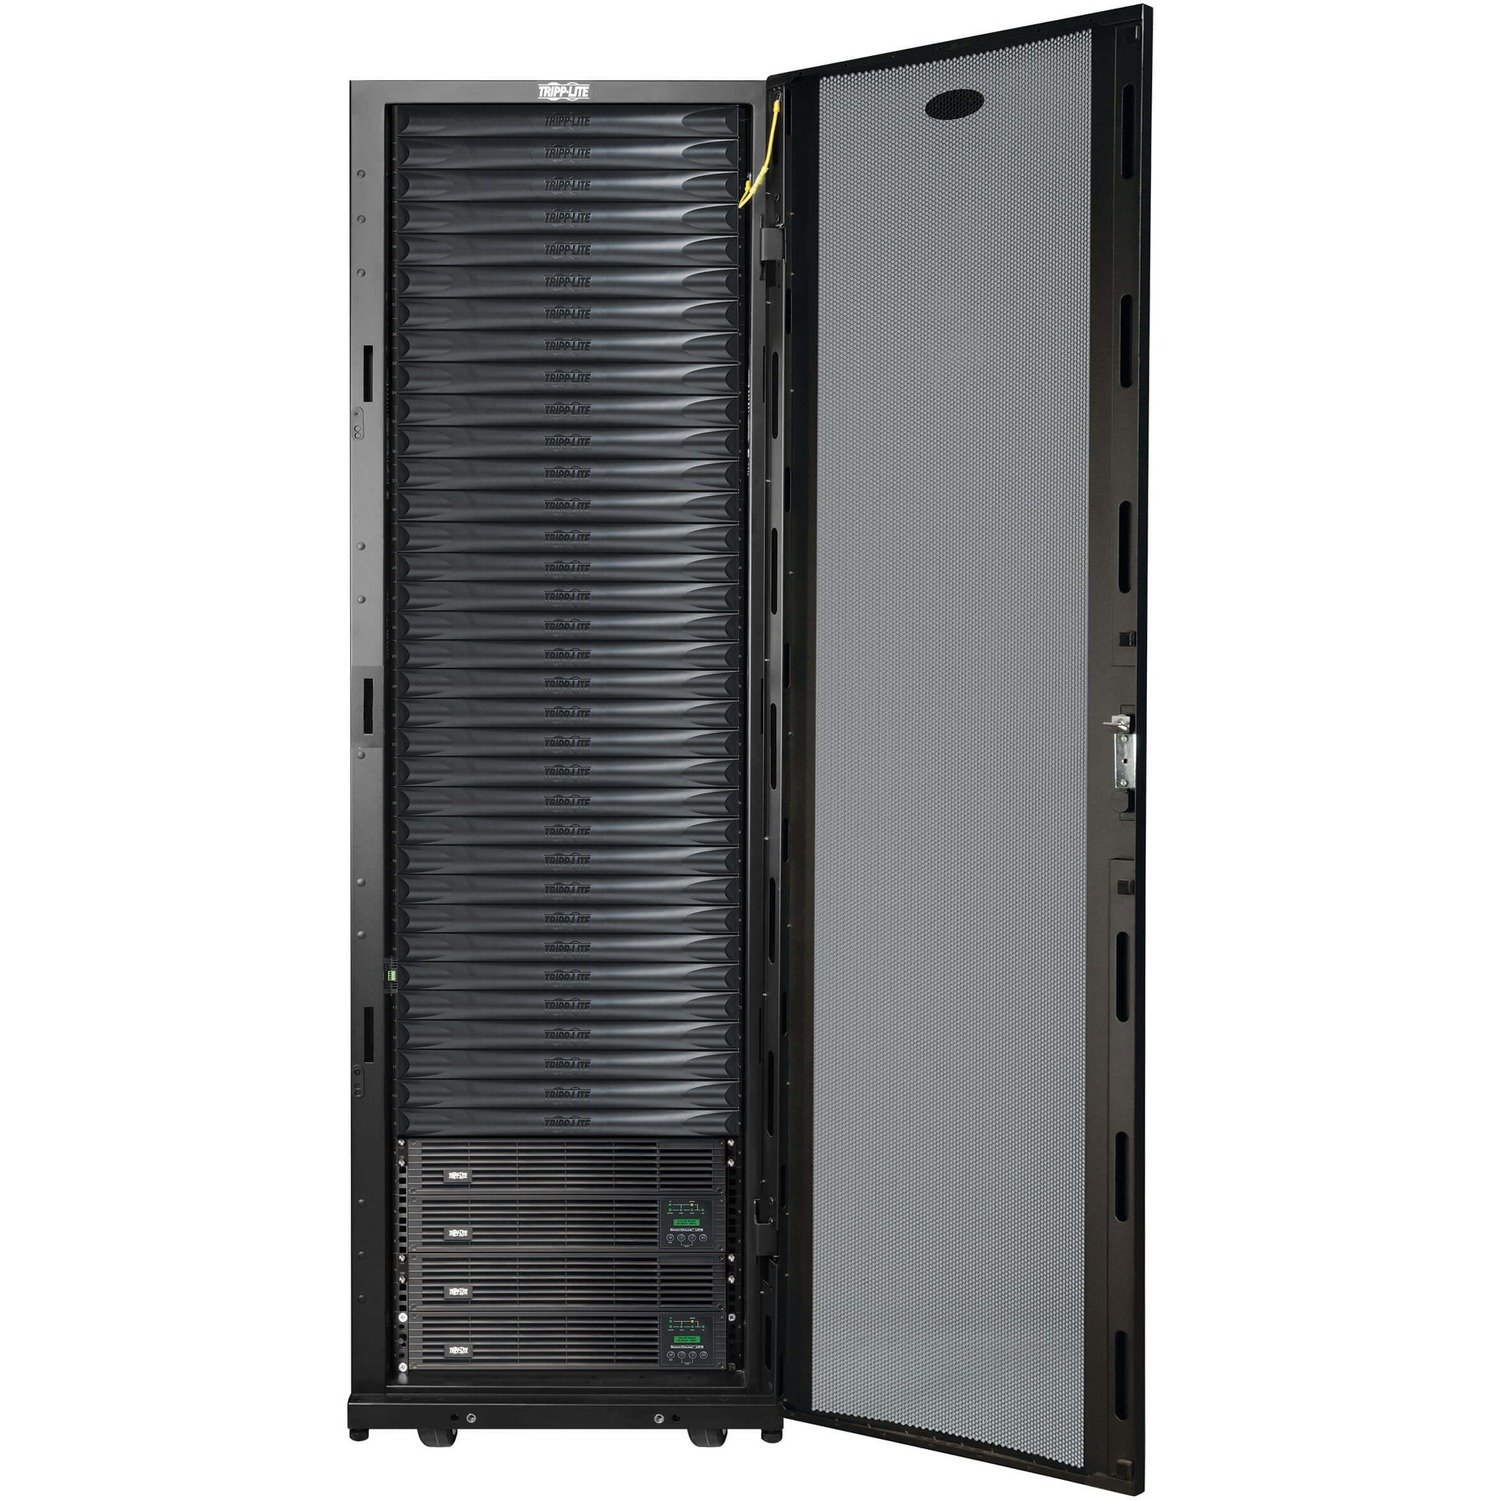 Tripp Lite by Eaton EdgeReady&trade; Micro Data Center - 34U, (2) 6 kVA UPS Systems (N+N), Network Management and Dual PDUs, 208/240V Assembled/Tested Unit